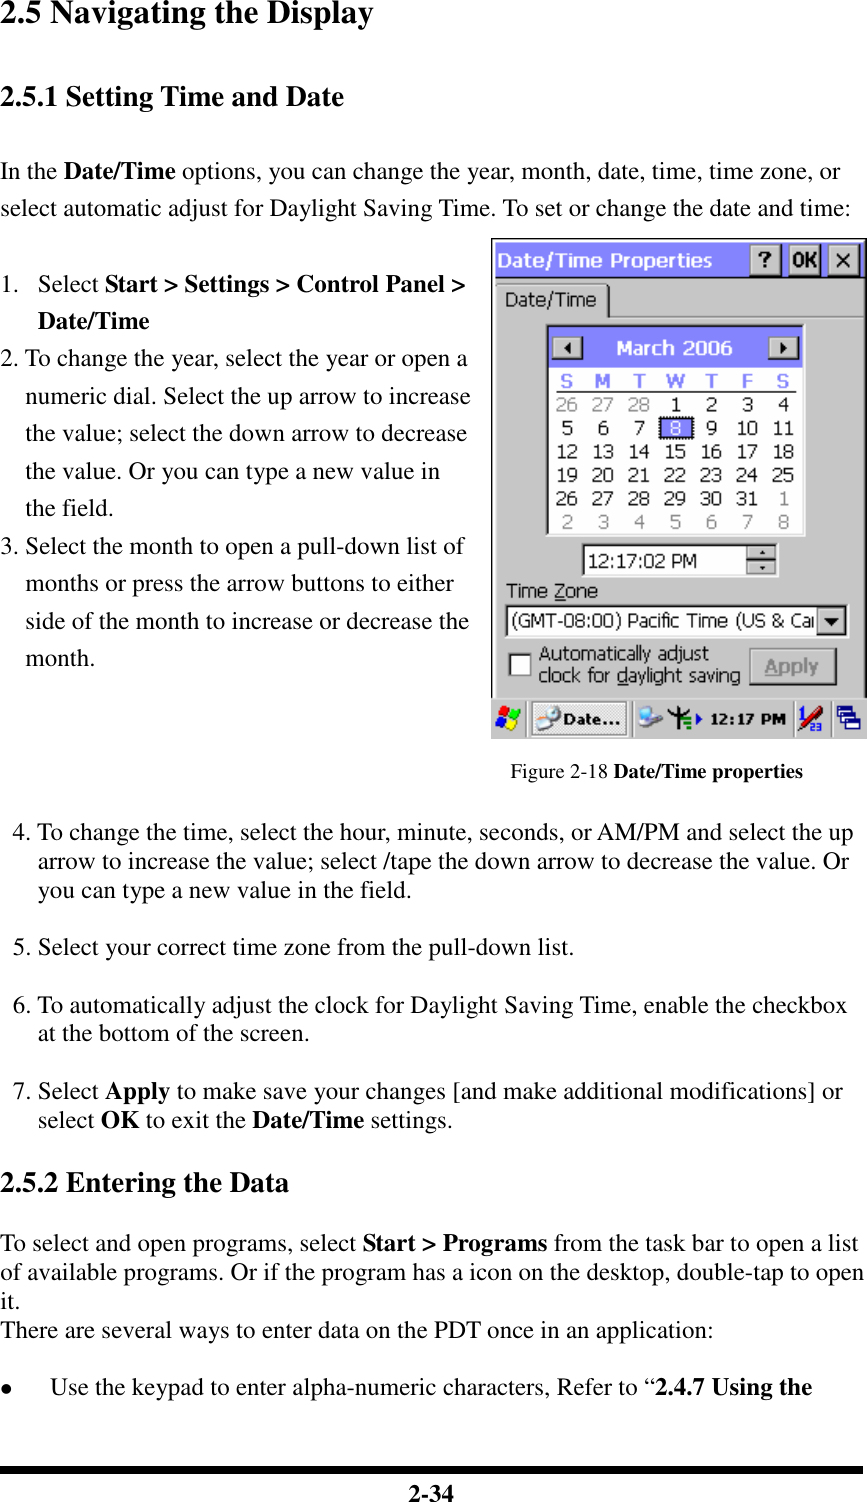  2-34 2.5 Navigating the Display  2.5.1 Setting Time and Date  In the Date/Time options, you can change the year, month, date, time, time zone, or select automatic adjust for Daylight Saving Time. To set or change the date and time:  1. Select Start &gt; Settings &gt; Control Panel &gt; Date/Time 2. To change the year, select the year or open a numeric dial. Select the up arrow to increase the value; select the down arrow to decrease the value. Or you can type a new value in the field. 3. Select the month to open a pull-down list of months or press the arrow buttons to either side of the month to increase or decrease the month.   Figure 2-18 Date/Time properties    4. To change the time, select the hour, minute, seconds, or AM/PM and select the up arrow to increase the value; select /tape the down arrow to decrease the value. Or you can type a new value in the field.    5. Select your correct time zone from the pull-down list.    6. To automatically adjust the clock for Daylight Saving Time, enable the checkbox at the bottom of the screen.    7. Select Apply to make save your changes [and make additional modifications] or select OK to exit the Date/Time settings.  2.5.2 Entering the Data  To select and open programs, select Start &gt; Programs from the task bar to open a list of available programs. Or if the program has a icon on the desktop, double-tap to open it. There are several ways to enter data on the PDT once in an application:   Use the keypad to enter alpha-numeric characters, Refer to “2.4.7 Using the 